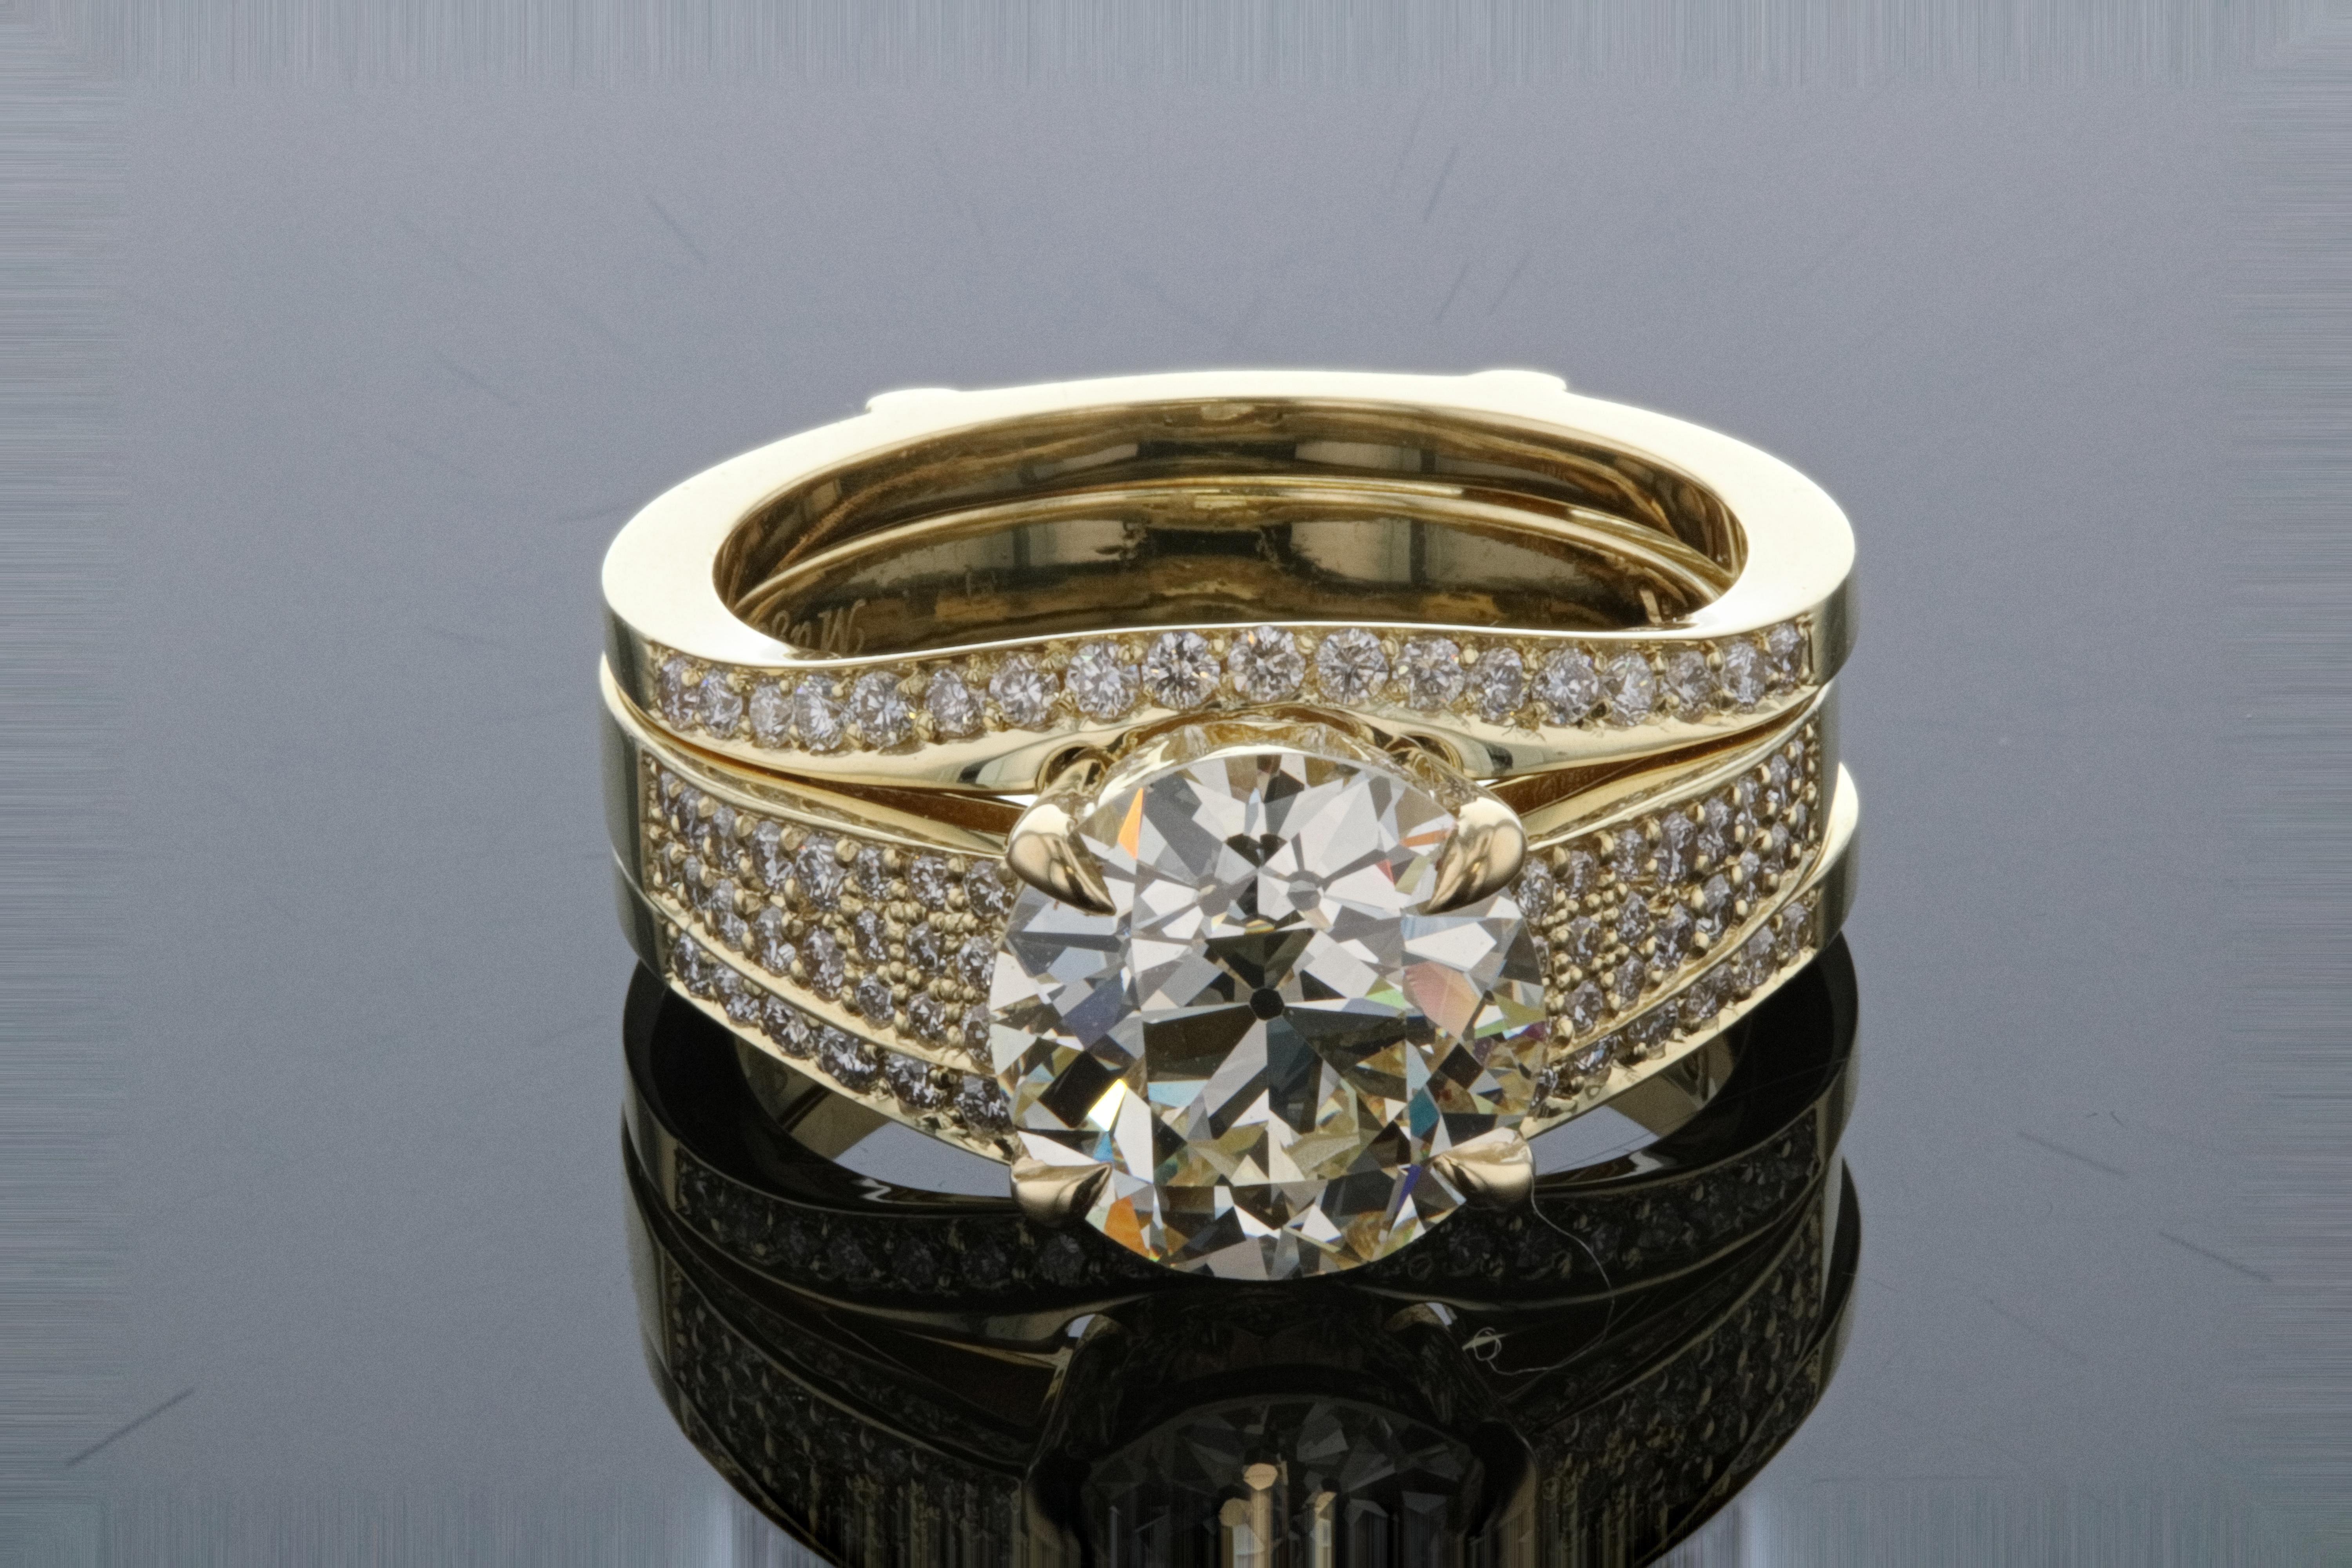 This round diamond engagement ring with matching ring jacket is a perfect pairing! Set with micro pave and a round diamond center stone, hidden details are under the basket. The diamond ring jacket is a perfect match and is crafted in 14k yellow